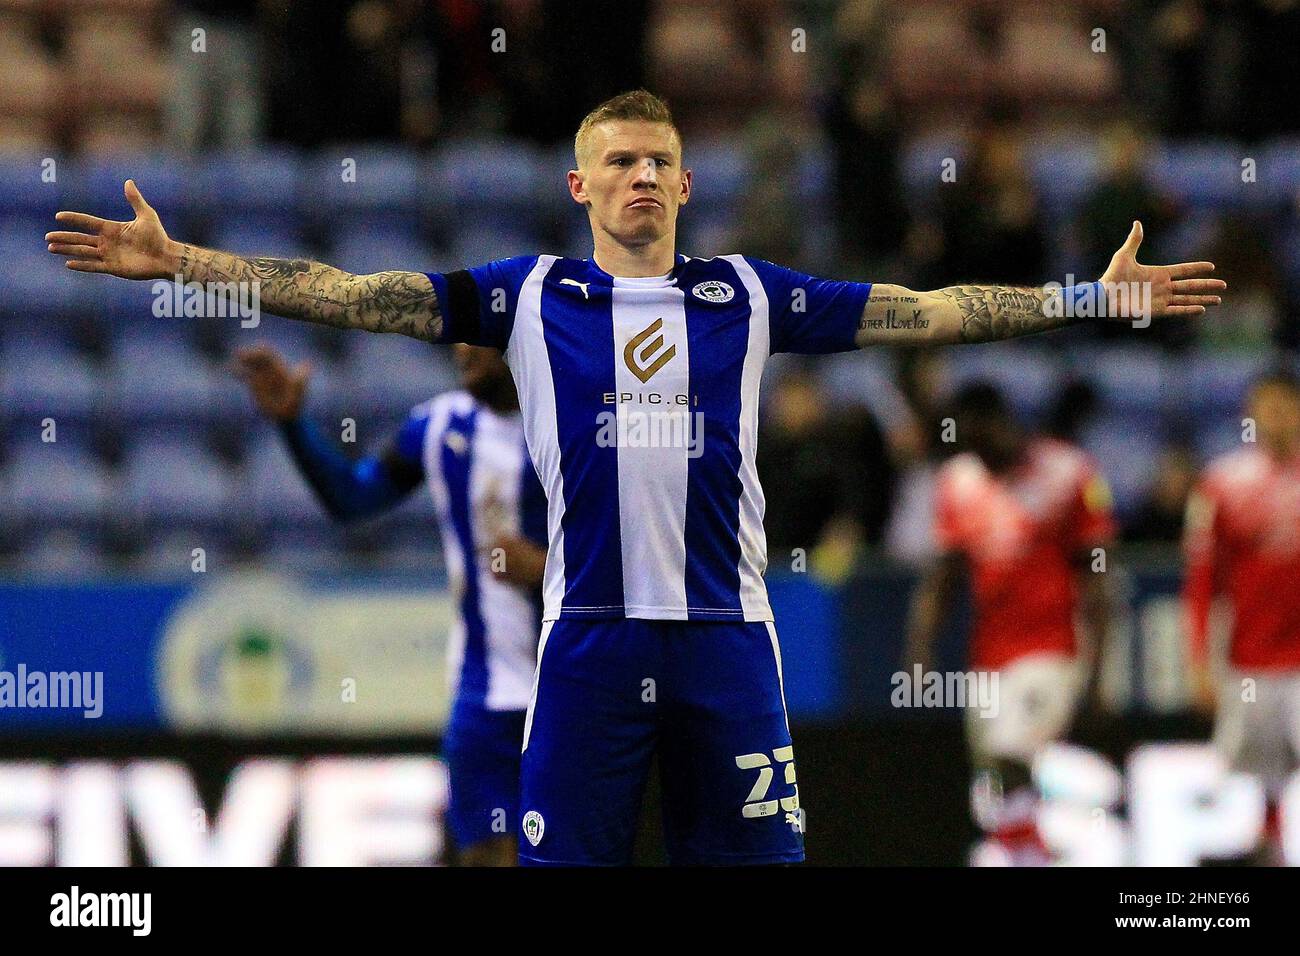 Wigan, UK. 15th Feb, 2022. James McClean of Wigan Athletic celebrates after scoring their second goal to make the score 2-0 during the Sky Bet League One match between Wigan Athletic and Crewe Alexandra at DW Stadium on February 15th 2022 in Wigan, England. (Photo by Tony Taylor/phcimages.com) Credit: PHC Images/Alamy Live News Stock Photo